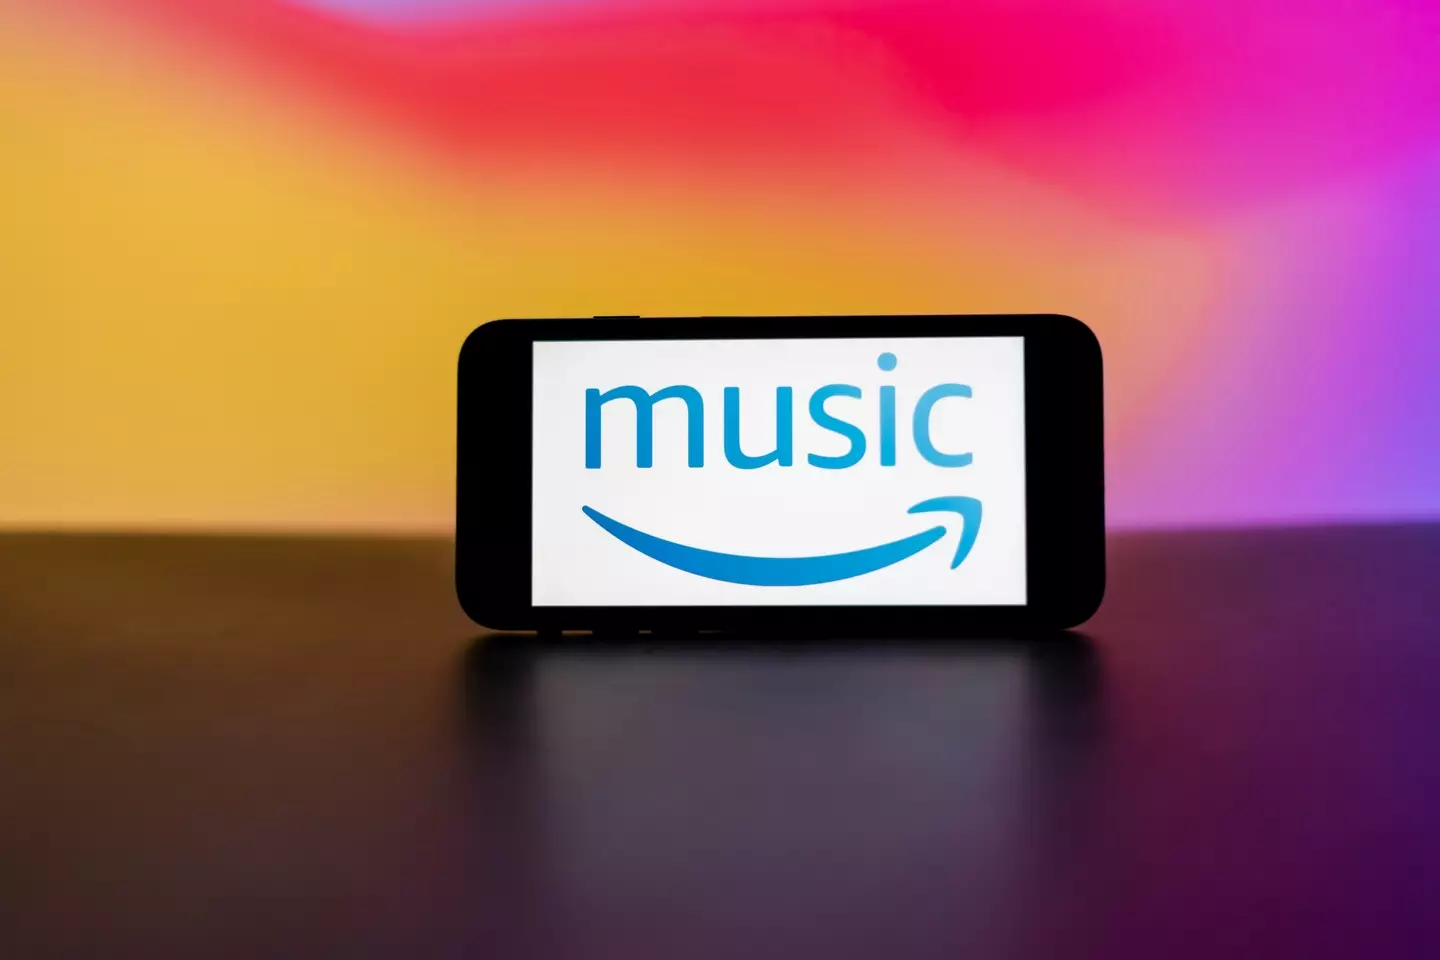 Amazon Music comes with a Prime subscription.